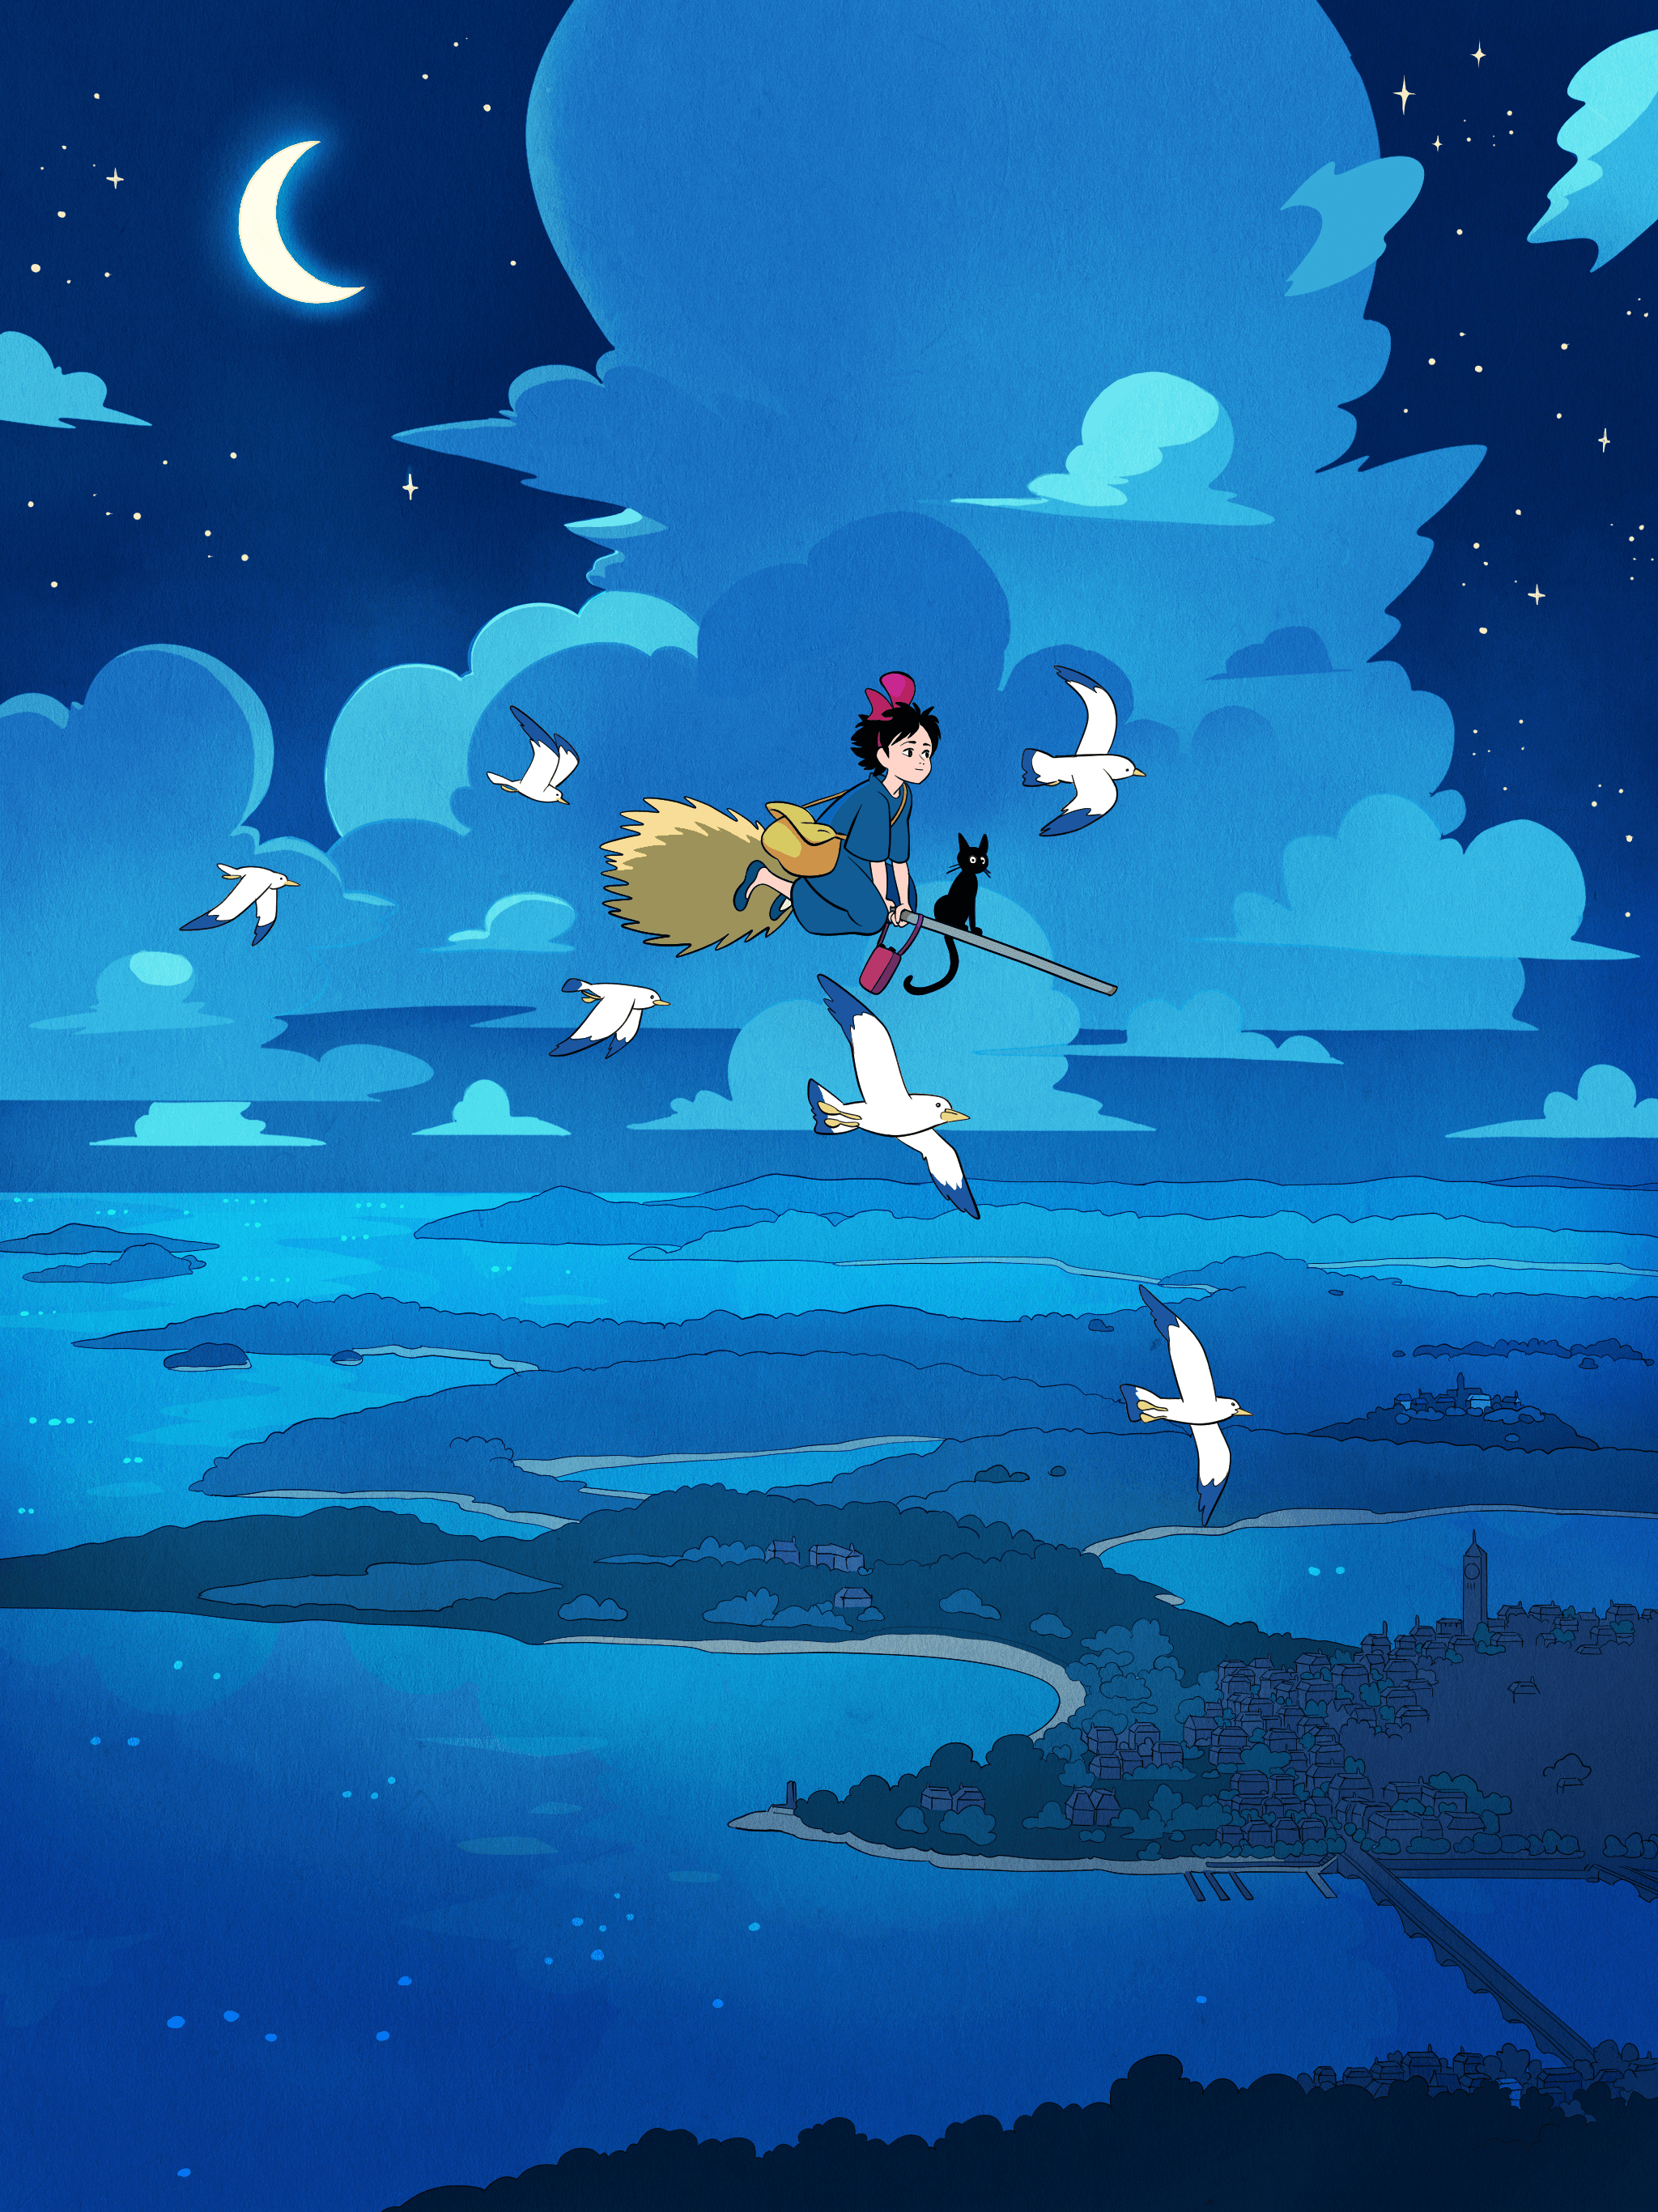 Moonlight Delivery